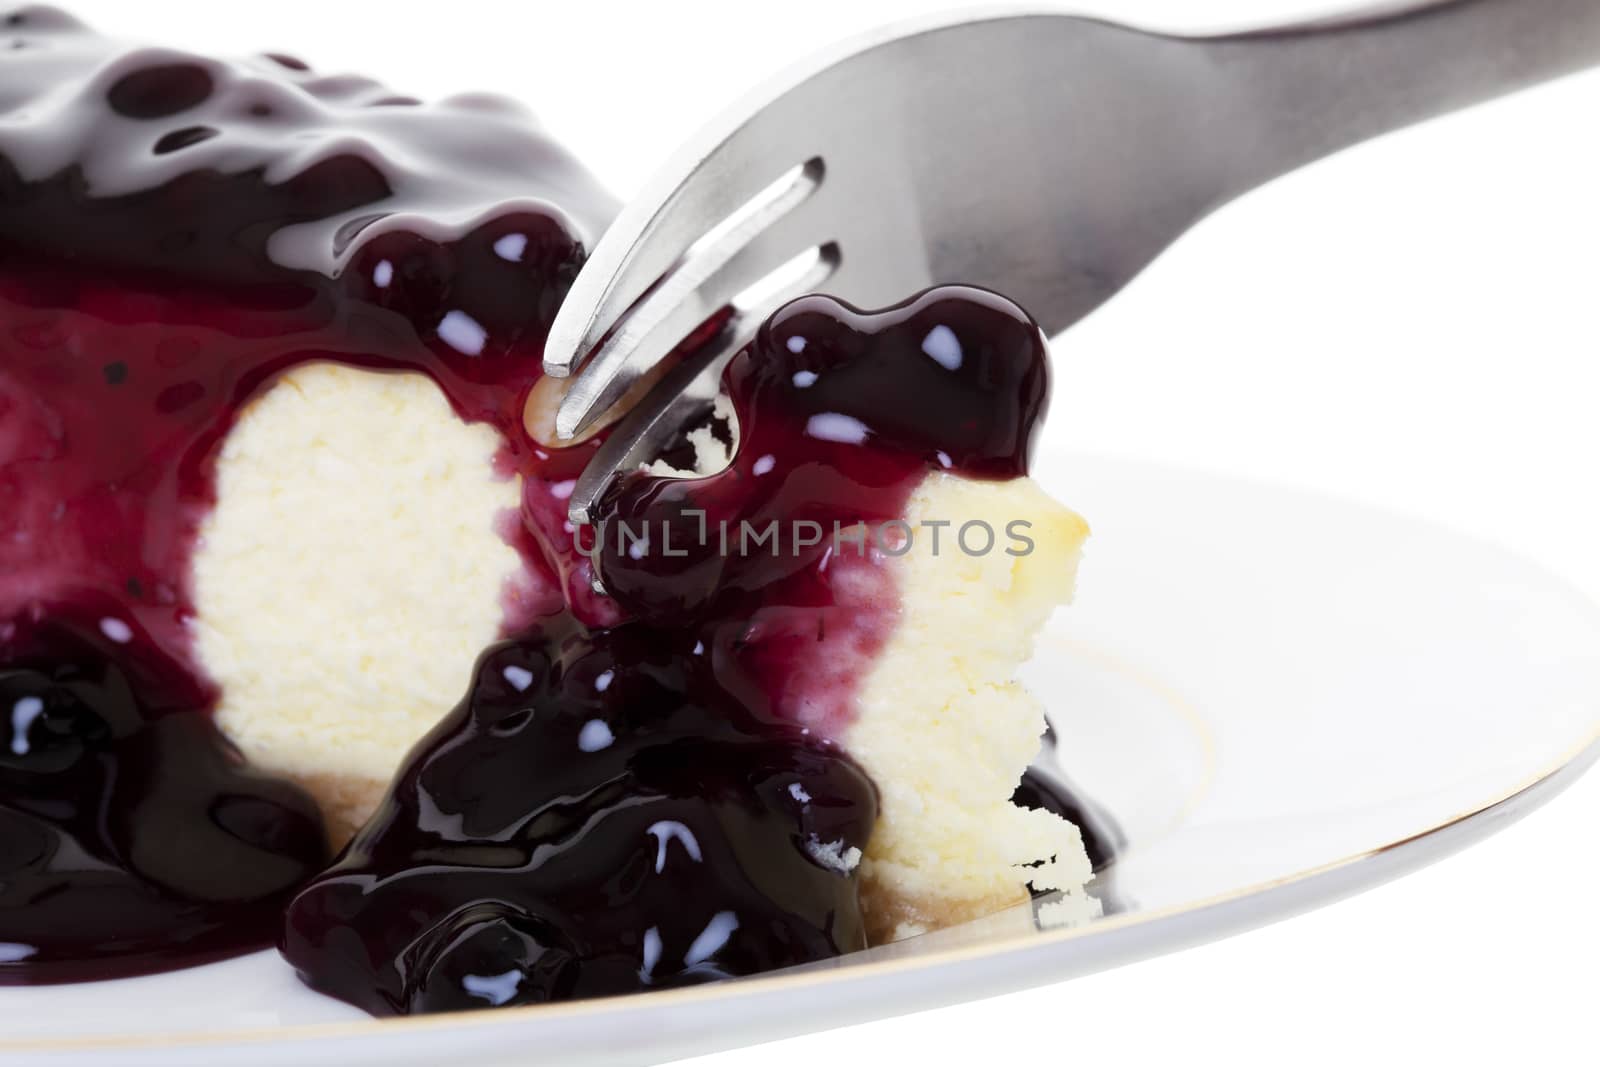 A fork sliding into a fresh piece of blueberry cheesecake.  Shot on white background.